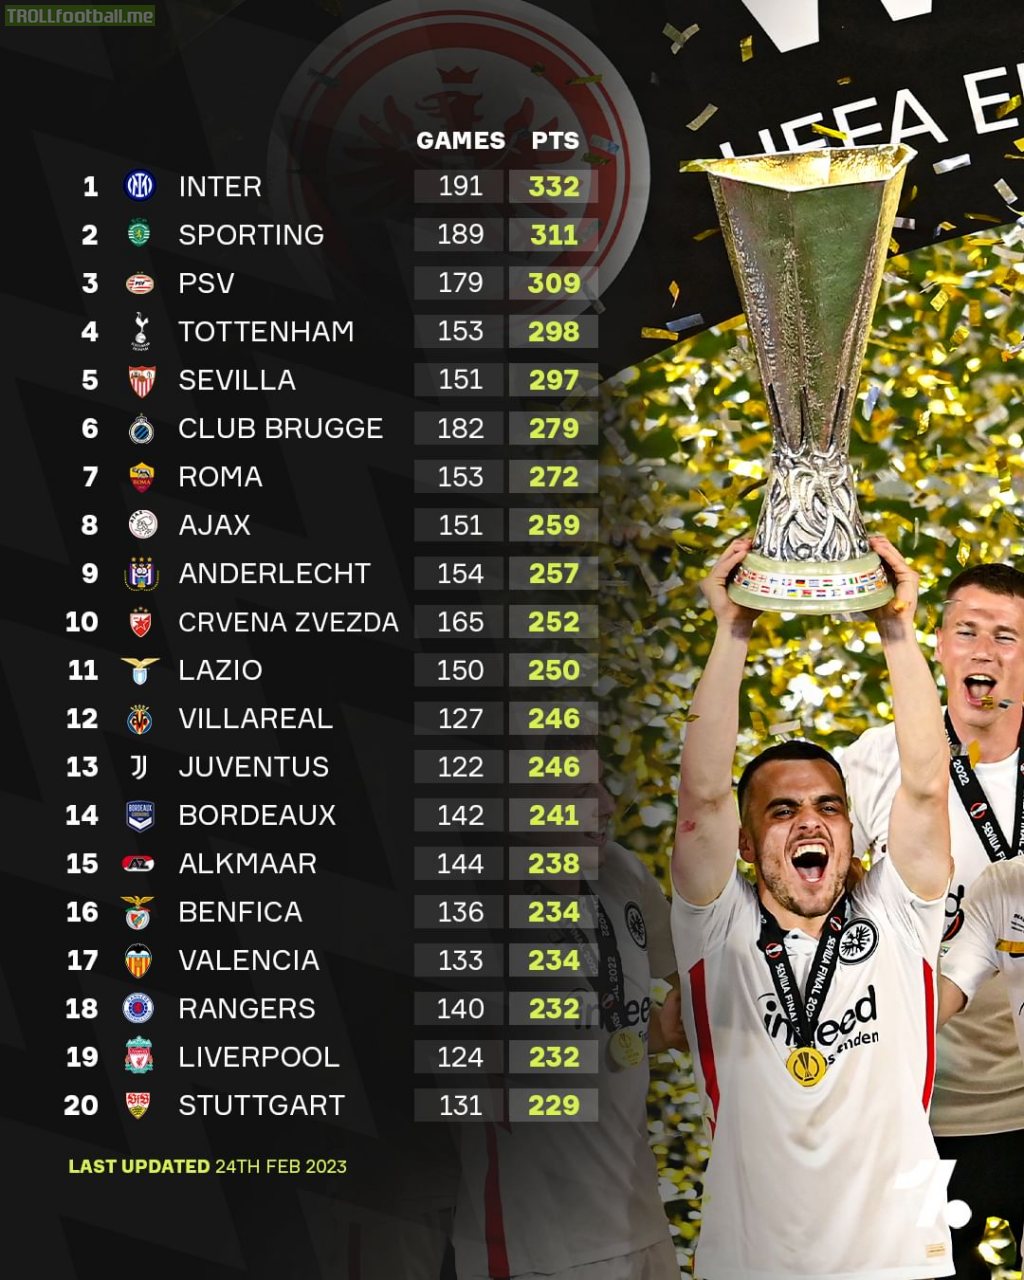 The Europa League All-time table